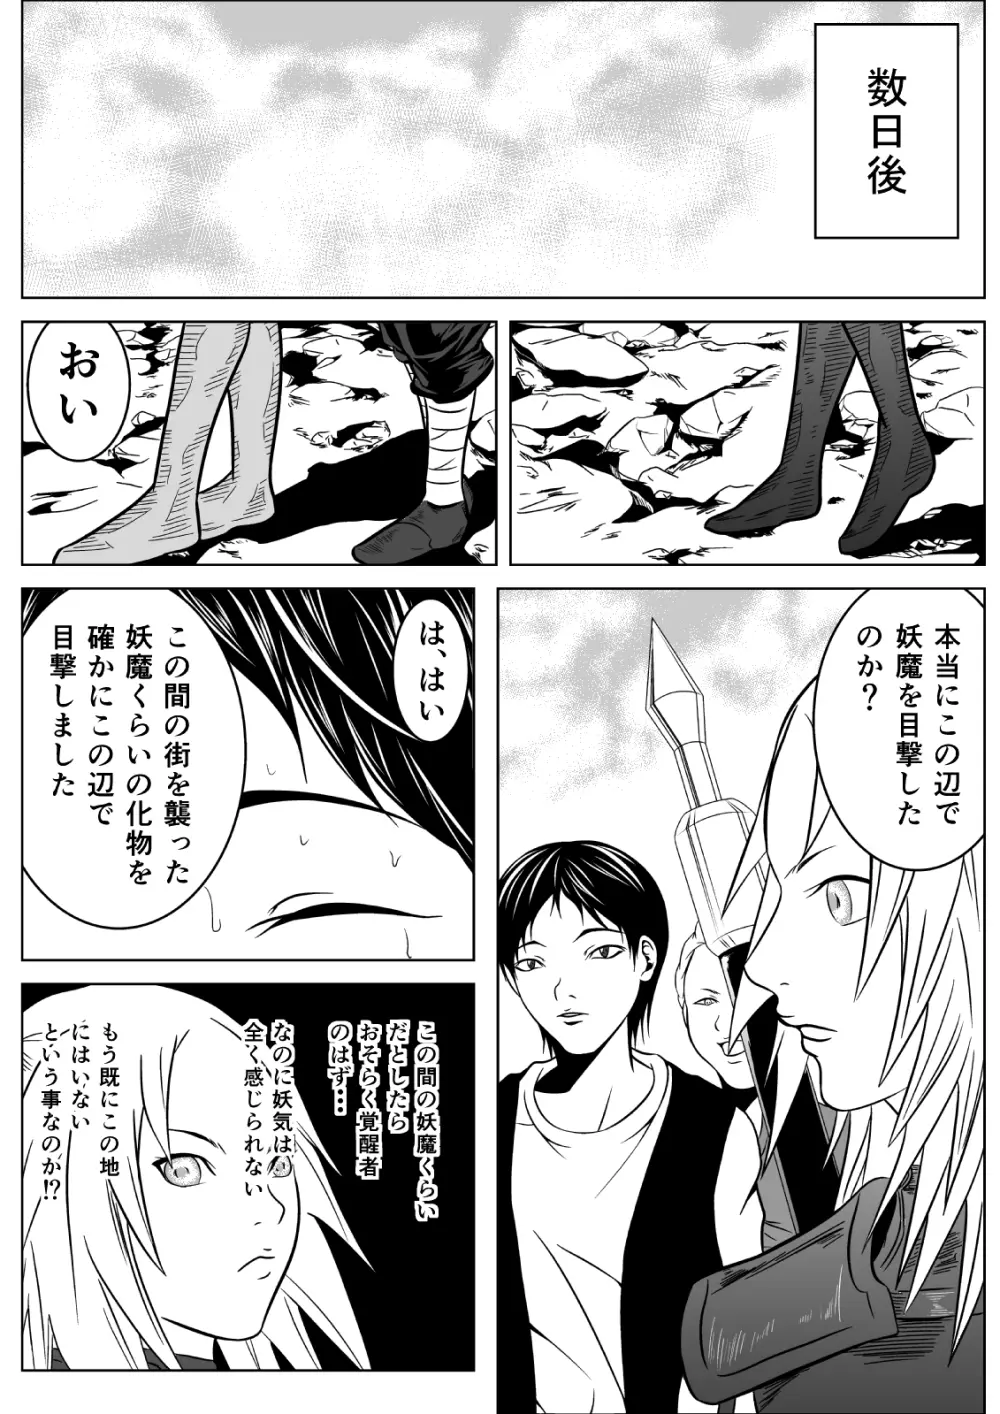 Ce0 嵌められた幻影 - page6